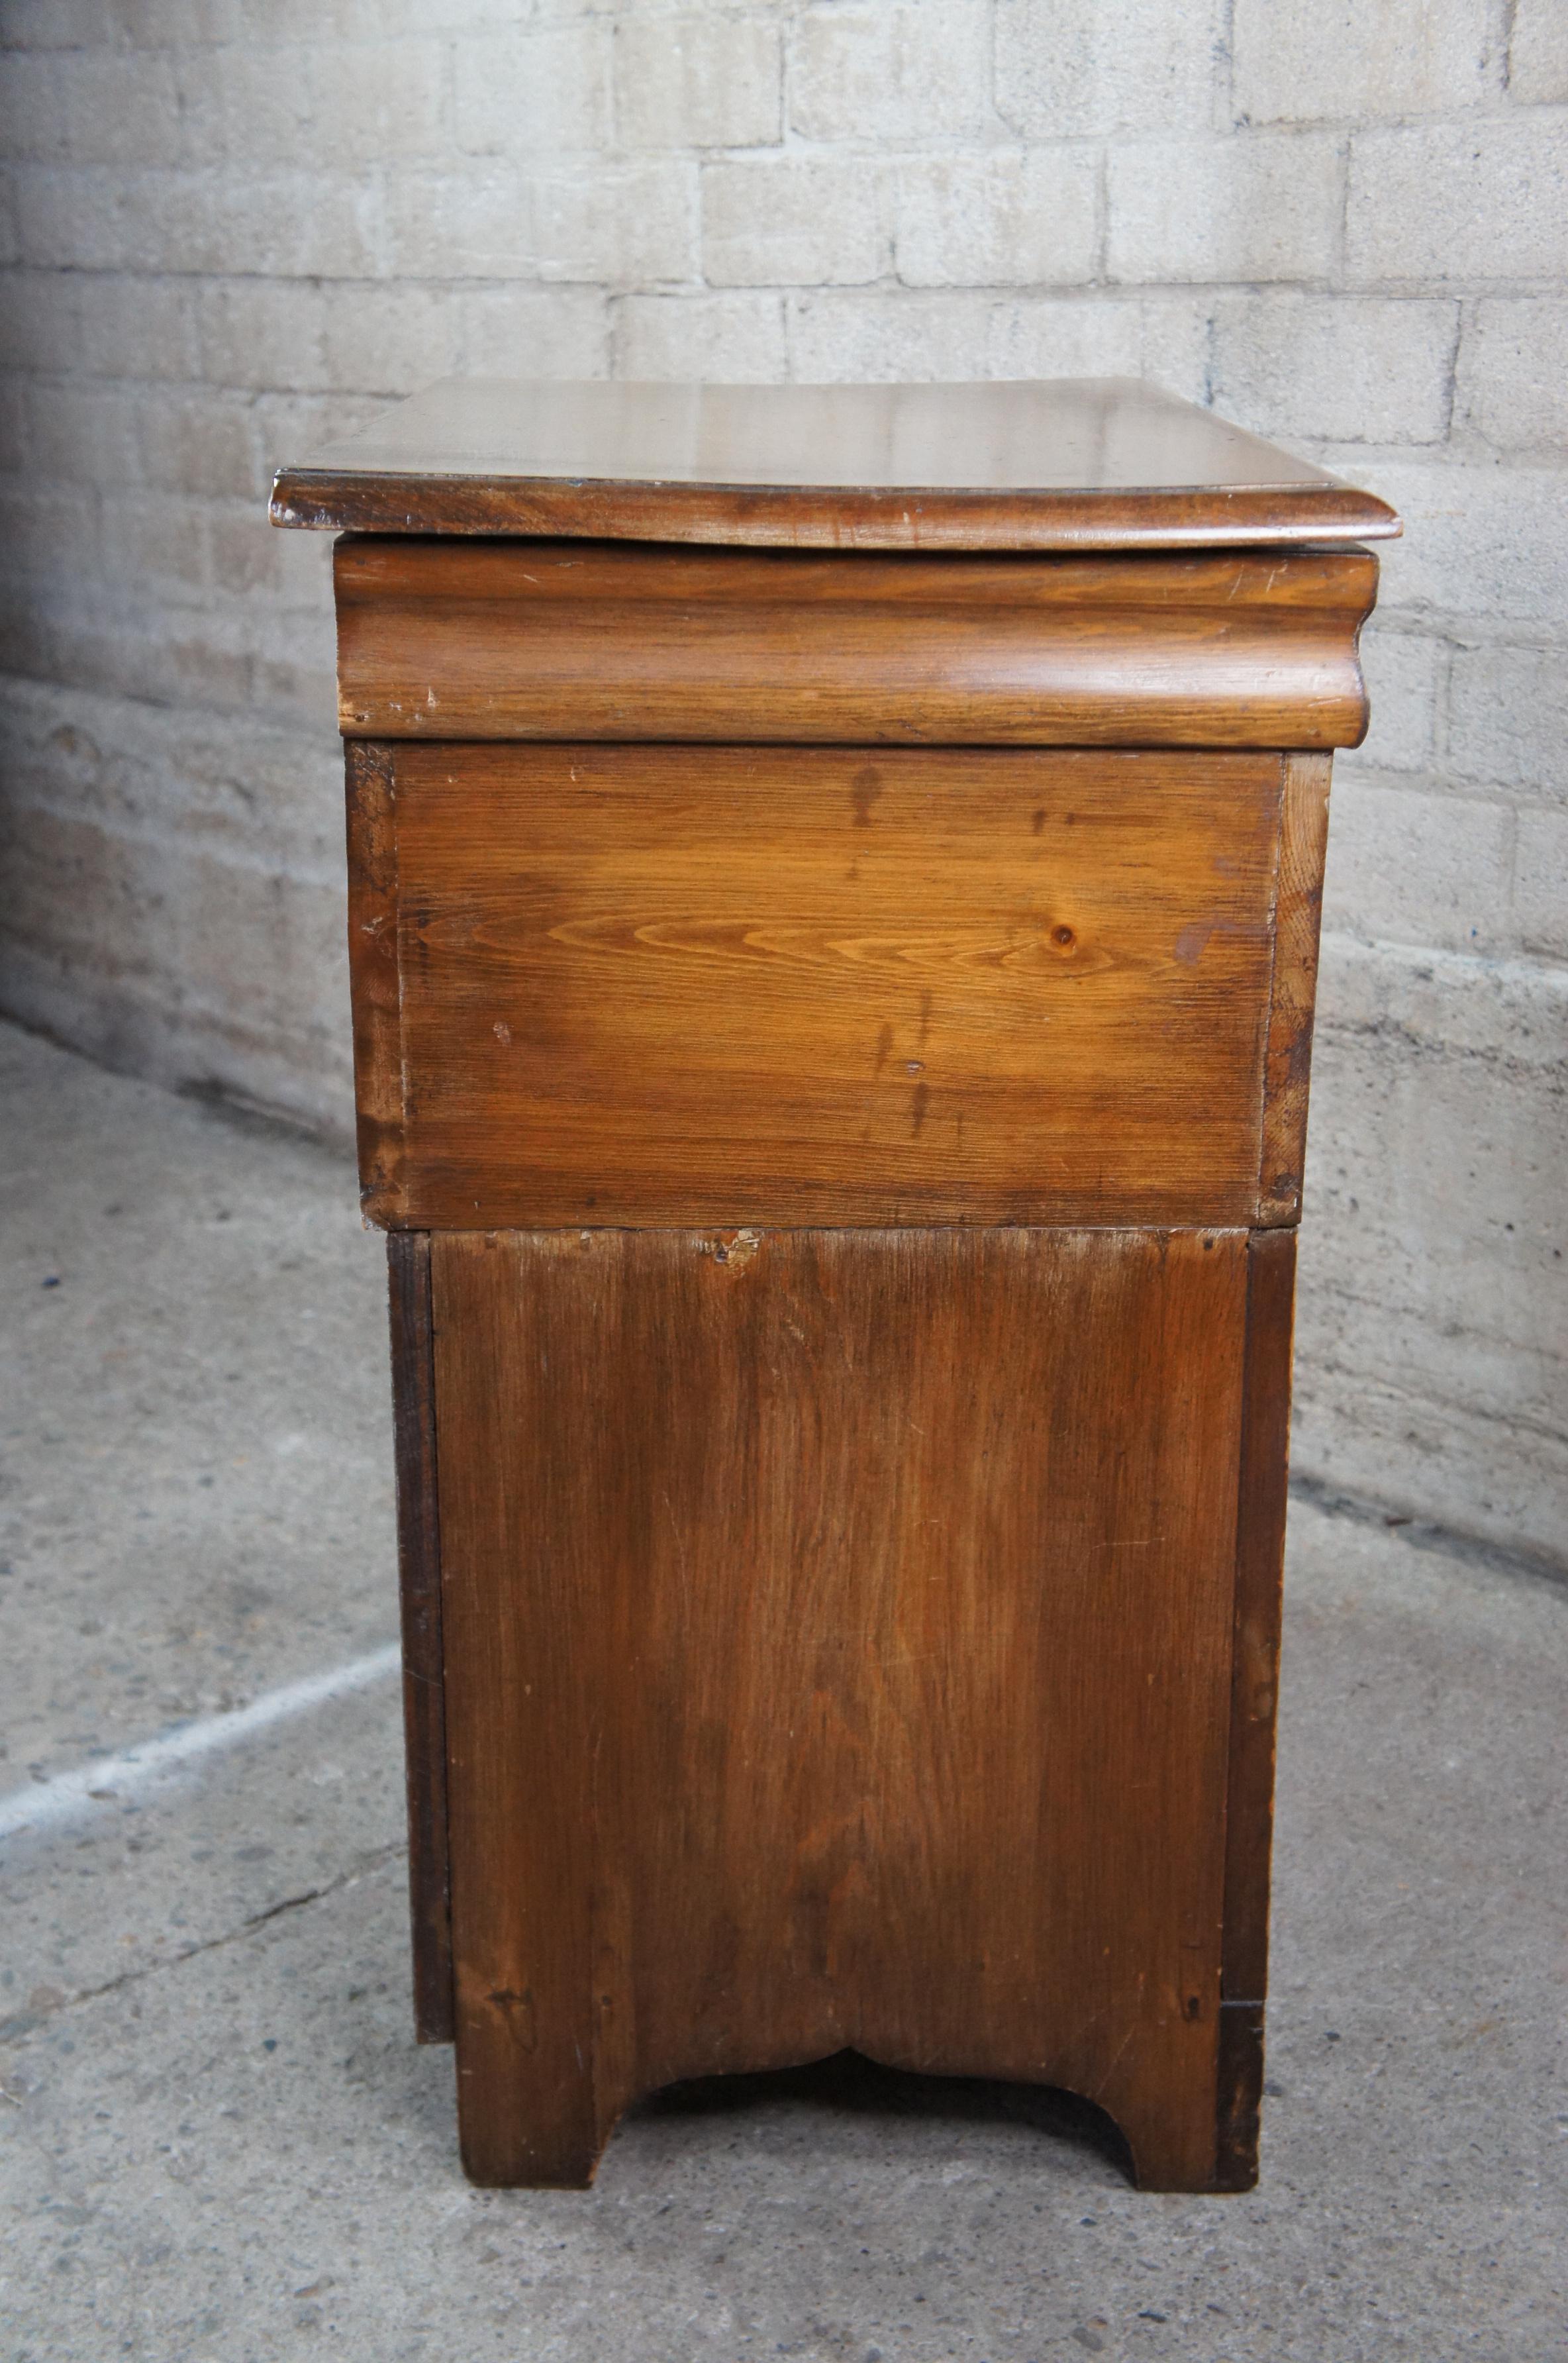 Early American Antique Pine Dough Box Bin Speaker Music Cabinet Trunk Chest For Sale 4